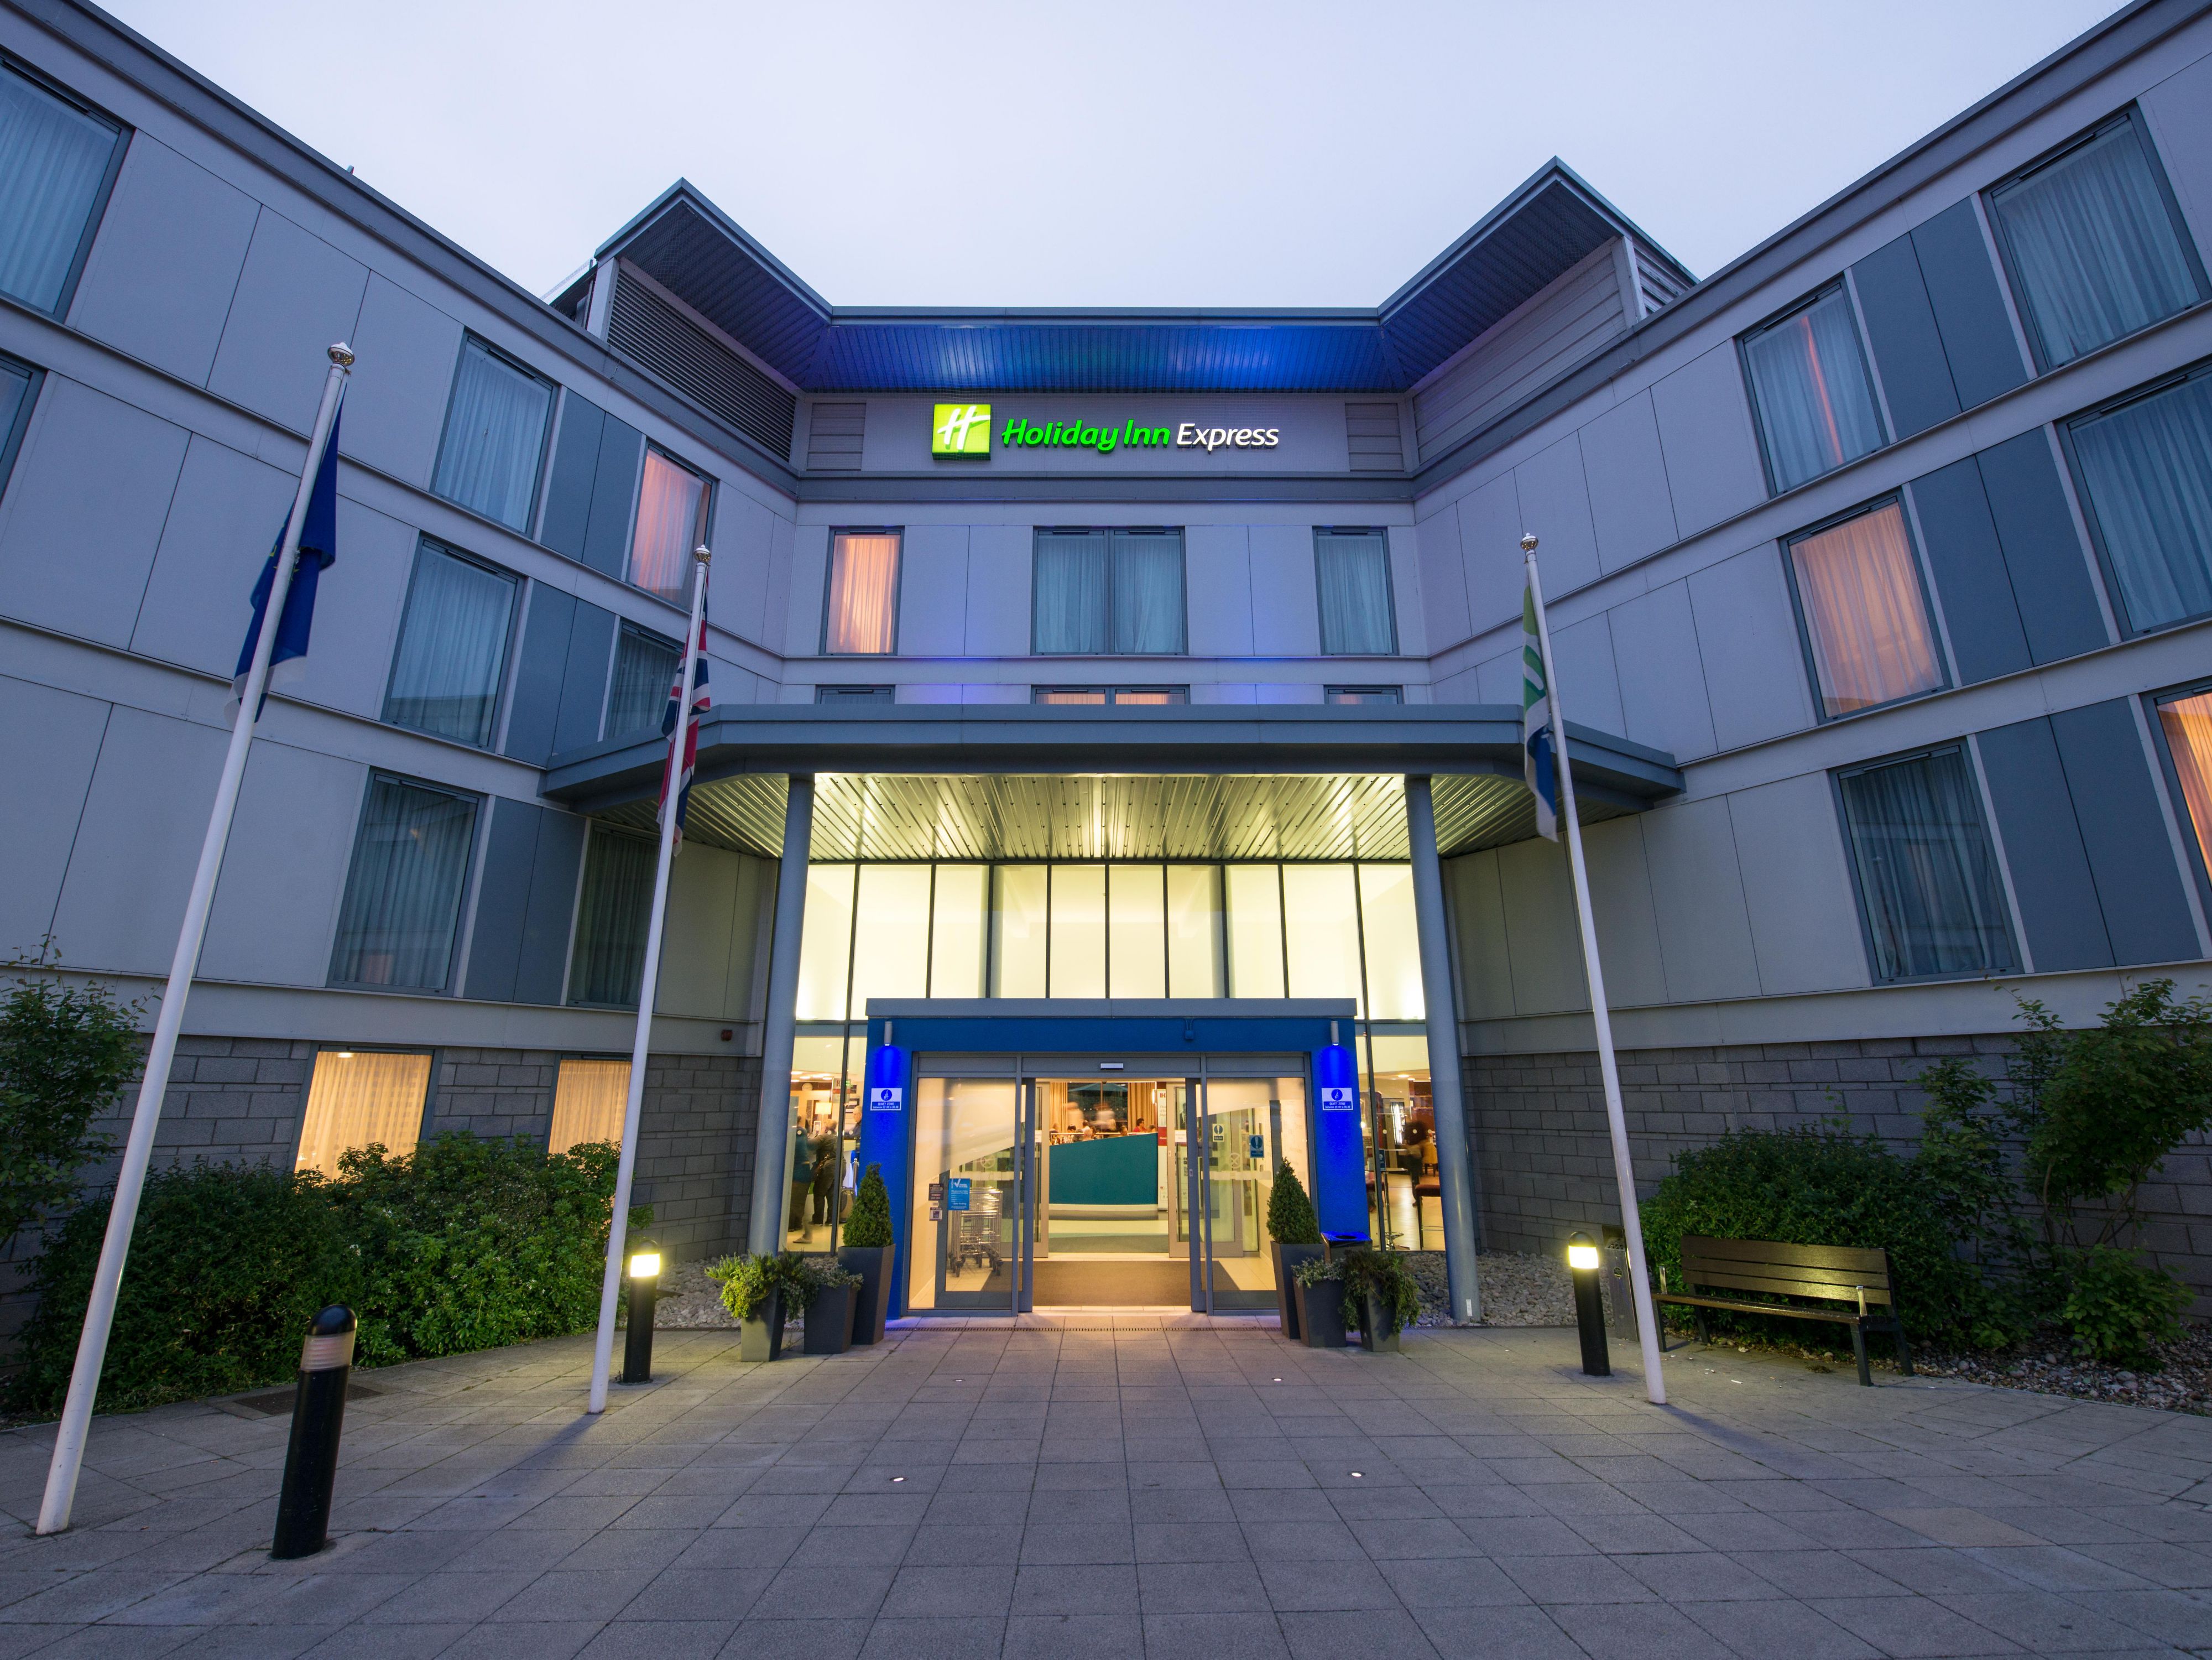 Holiday Inn Express Hotel London - Stansted Airport